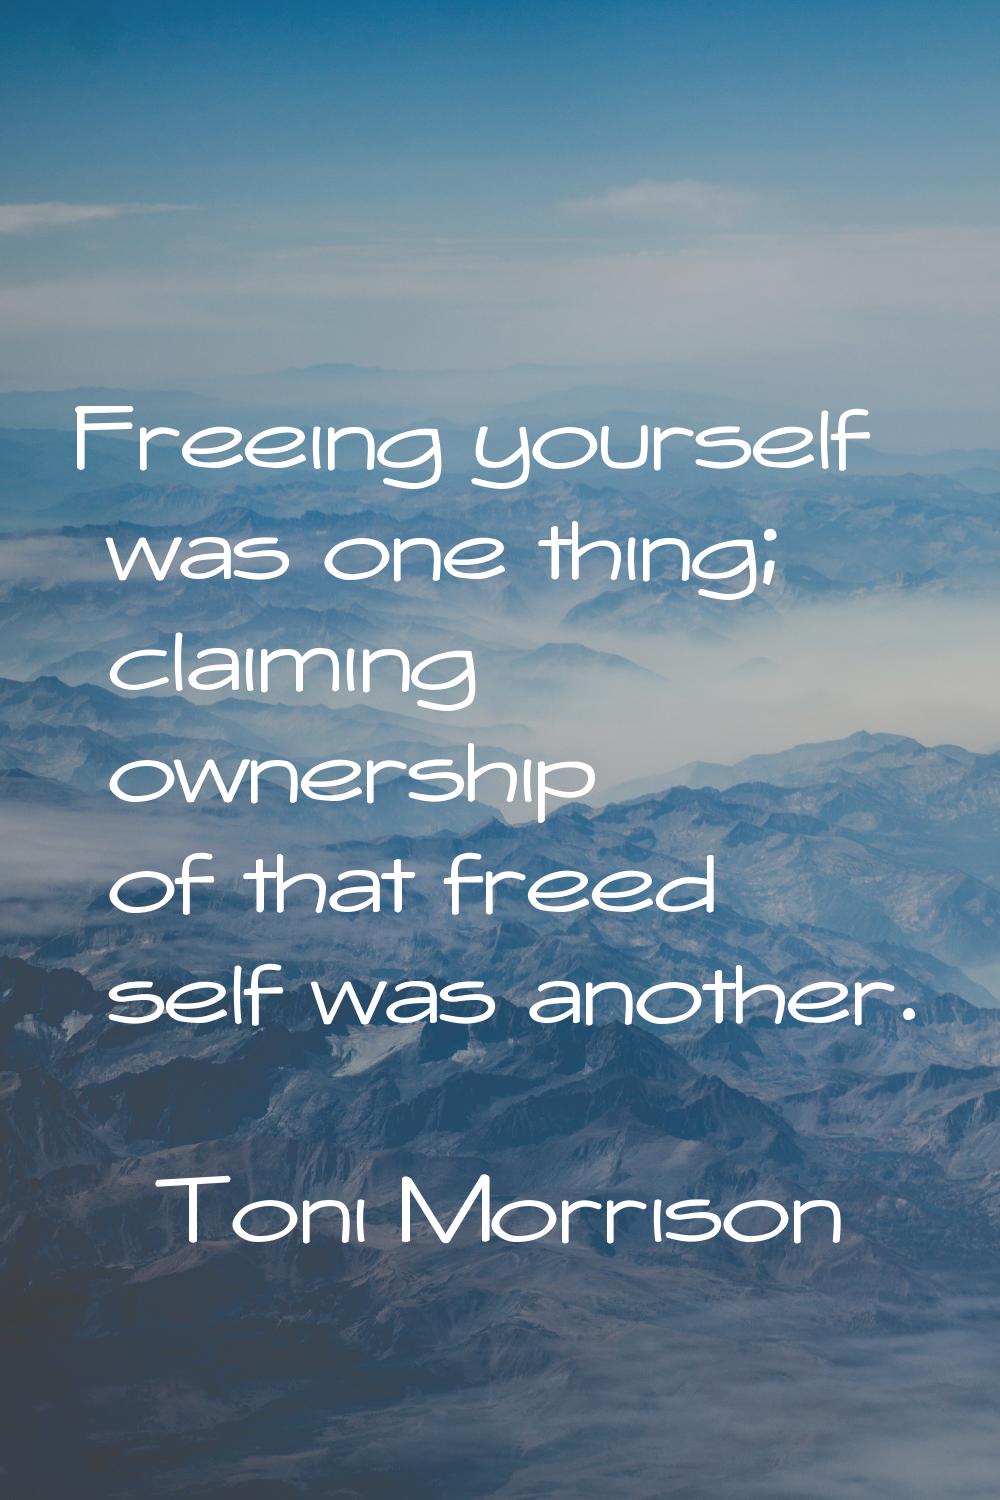 Freeing yourself was one thing; claiming ownership of that freed self was another.